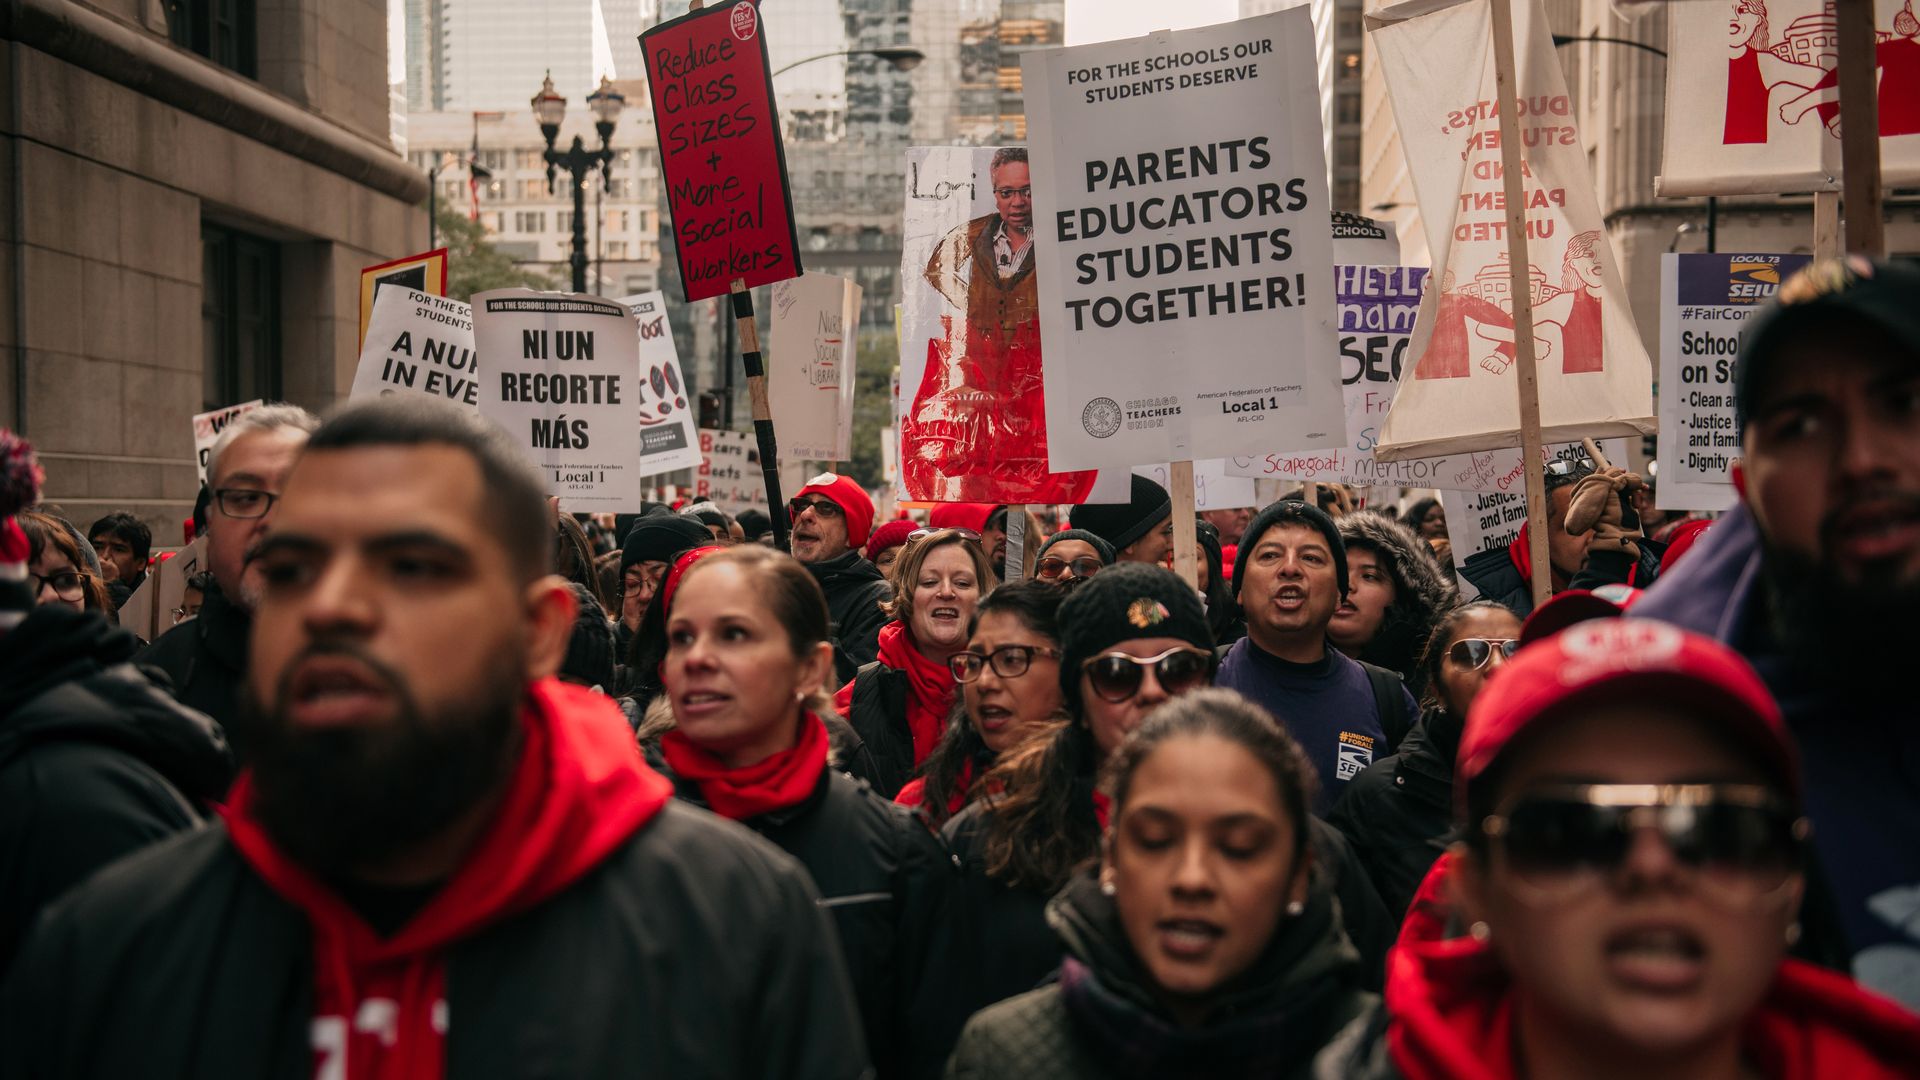 In this image, teachers on strike carry signs that read "Parents educators students together!" 